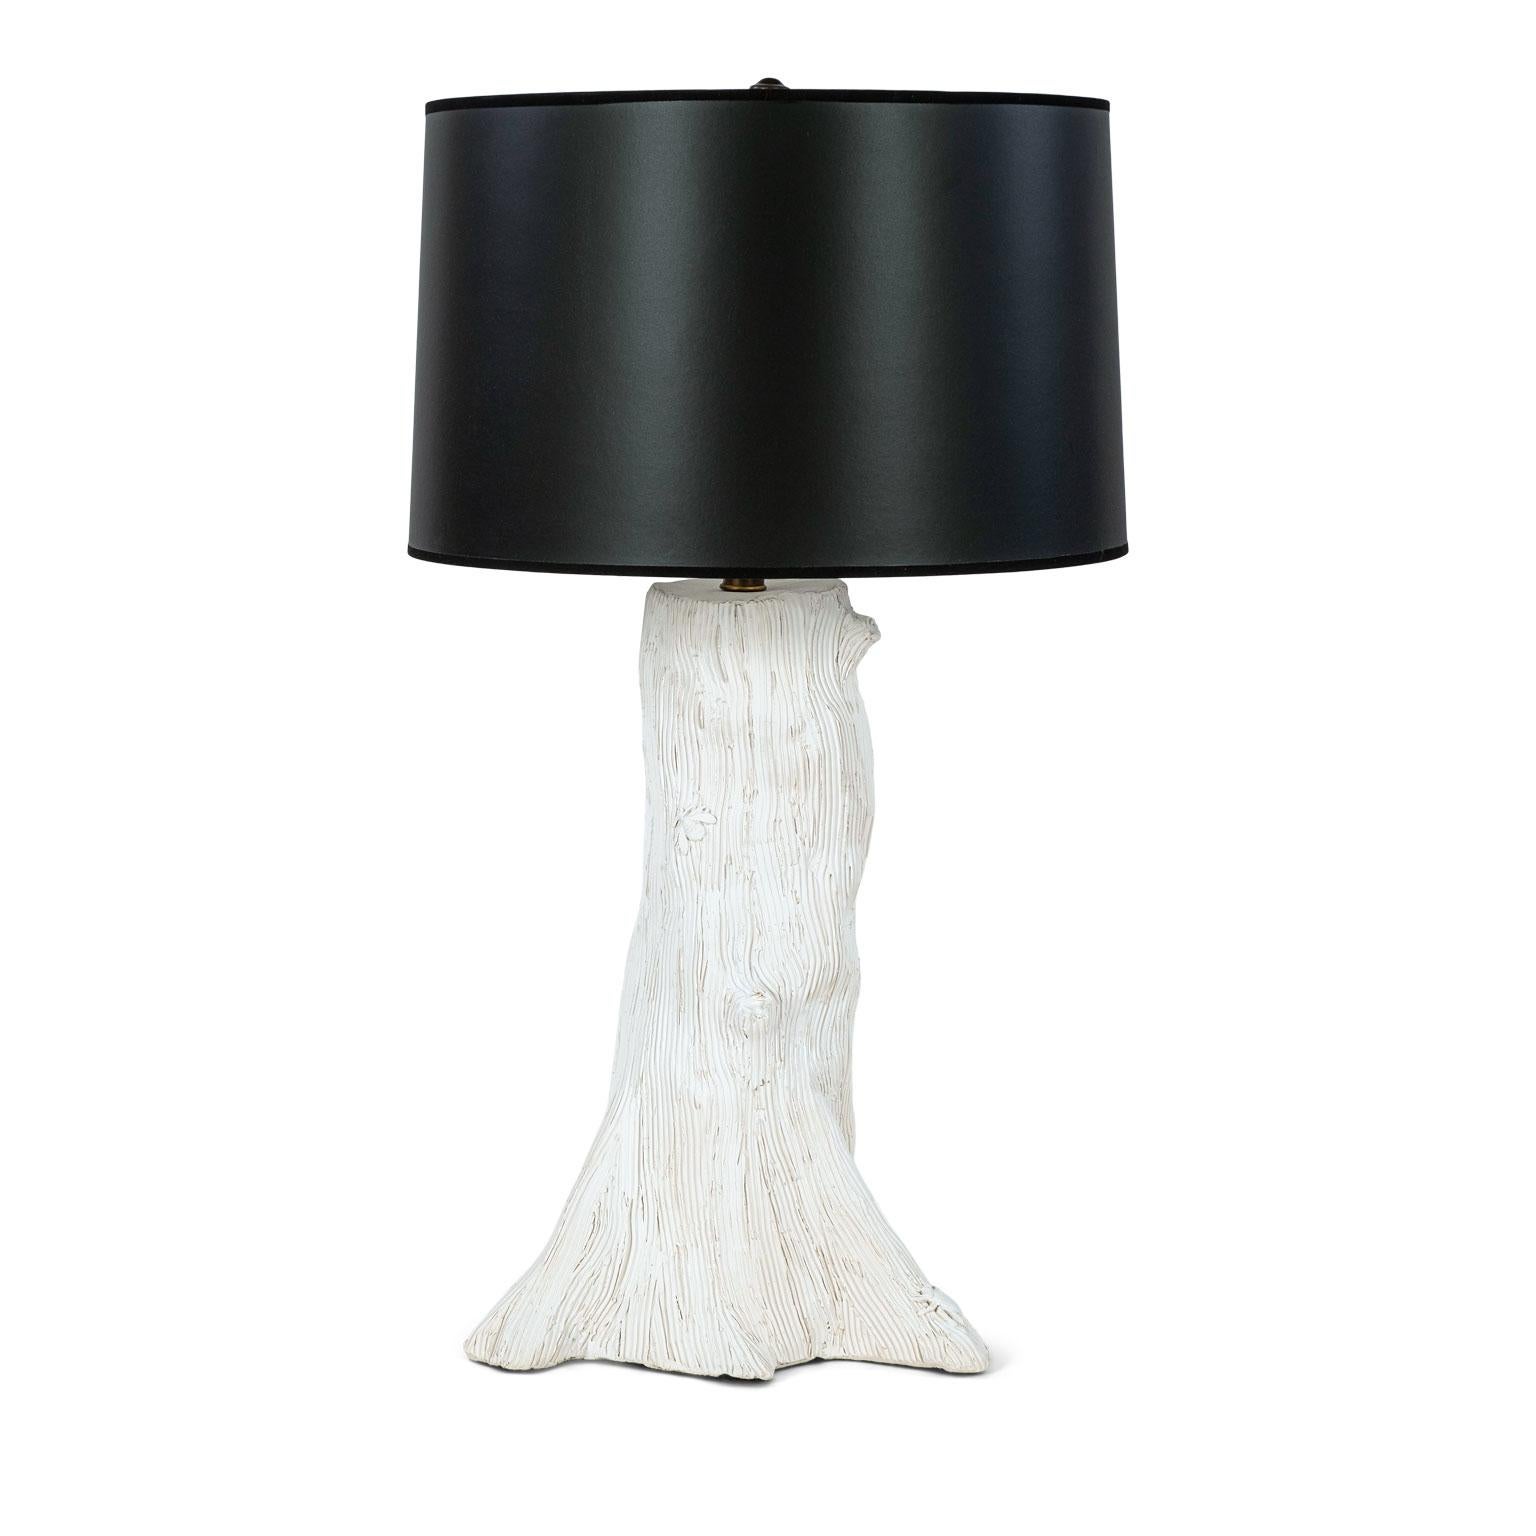 Hand-Crafted Custom White 'Faux Bois' Ceramic Lamp